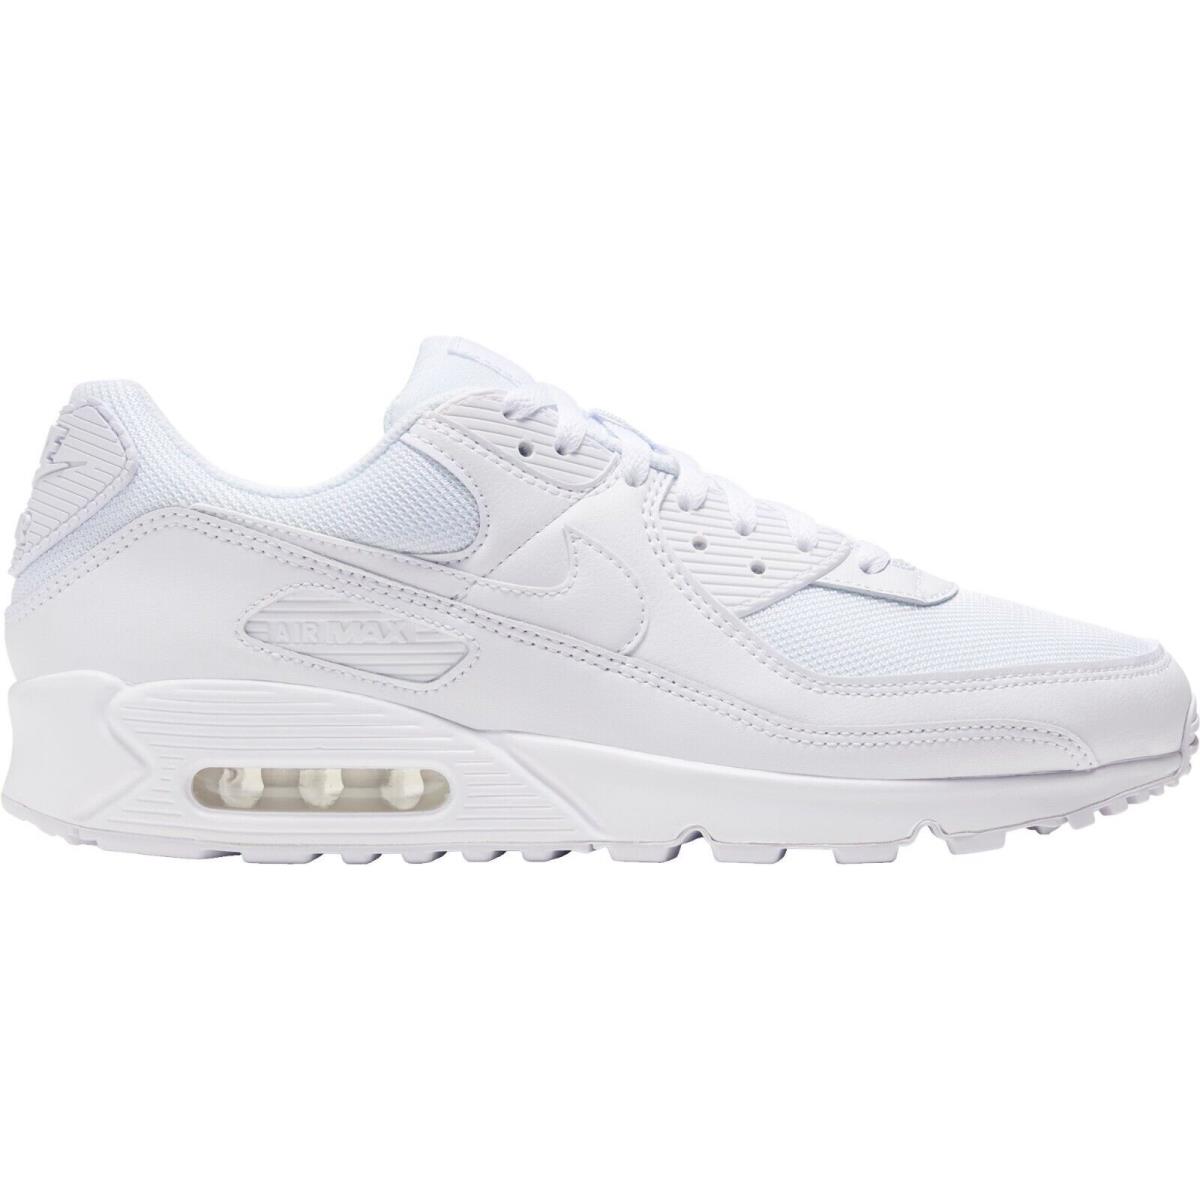 Nike Air Max 90 Men`s Casual Shoes All Colors US Sizes 7-14 Bestseller Triple White